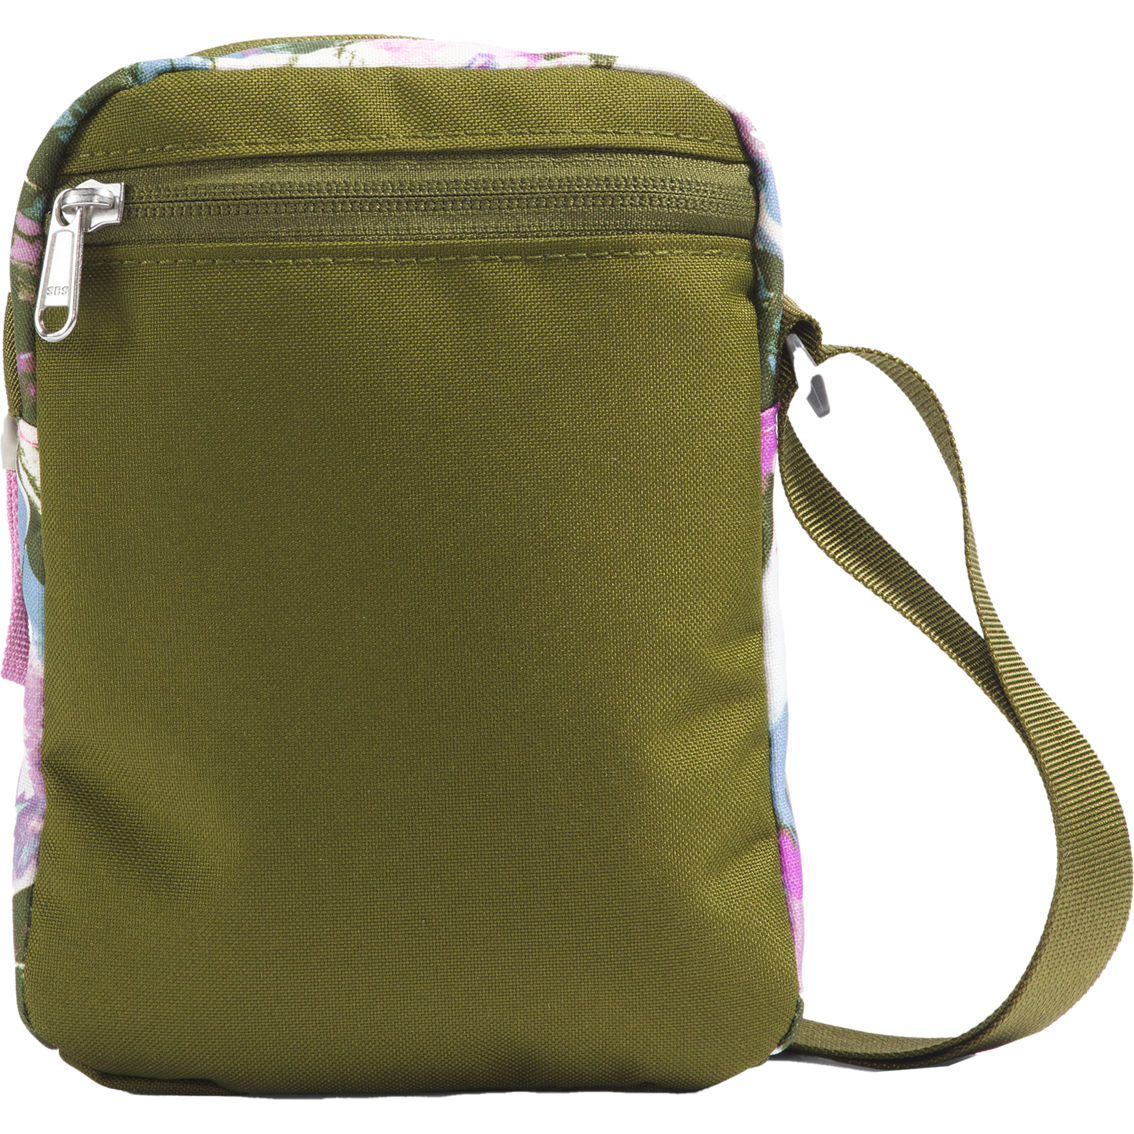 The North Face Jester Crossbody - Image 2 of 4